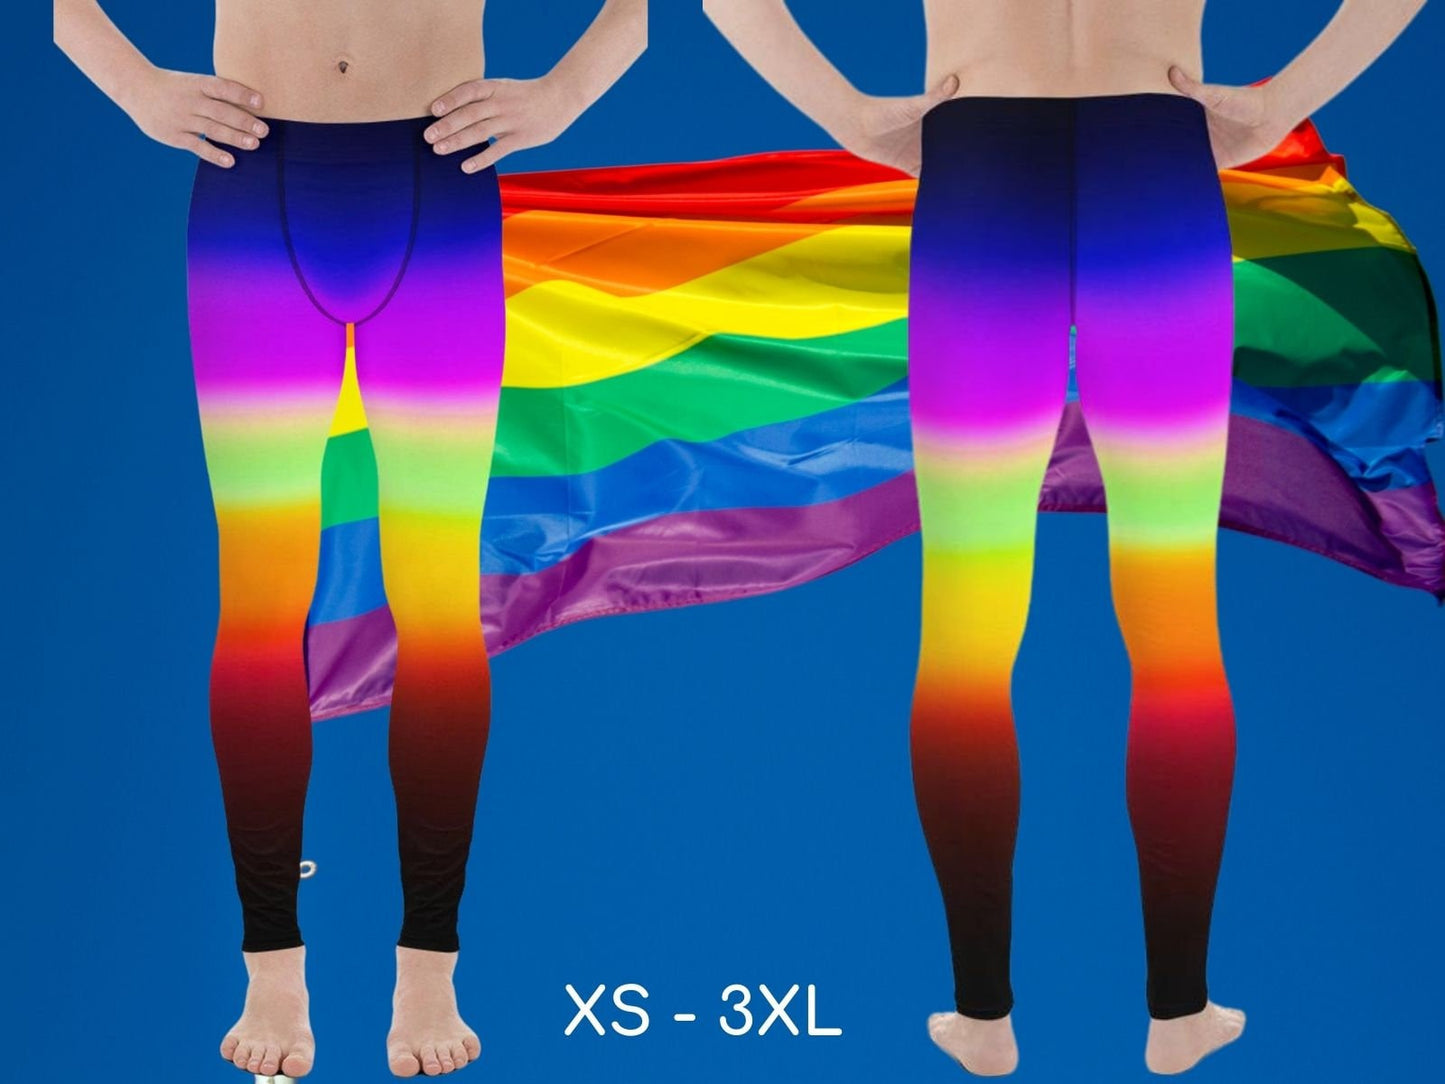 Rainbow Pride Striped Meggings for Men Activewear Leggings LGBT Gay Pride Parade Sports Workout Outfit Colorful Fun Spandex Pants